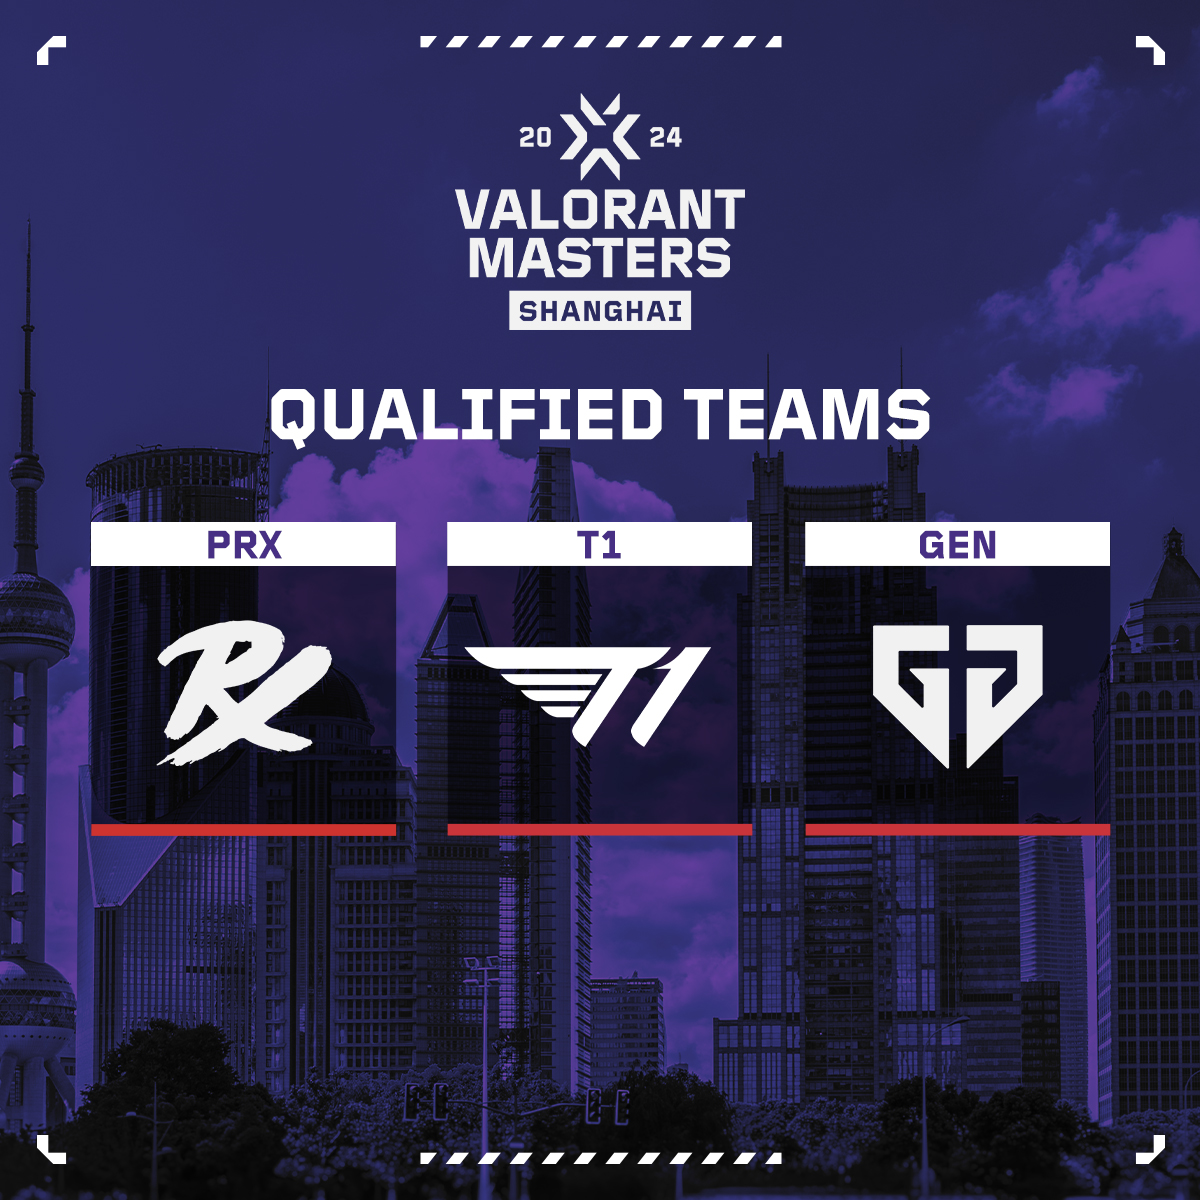 Ready to take on the challenge in #VALORANTMasters Shanghai! #VCTPacific is proud to be represented by @pprxteam, @T1, and @geng_gold!